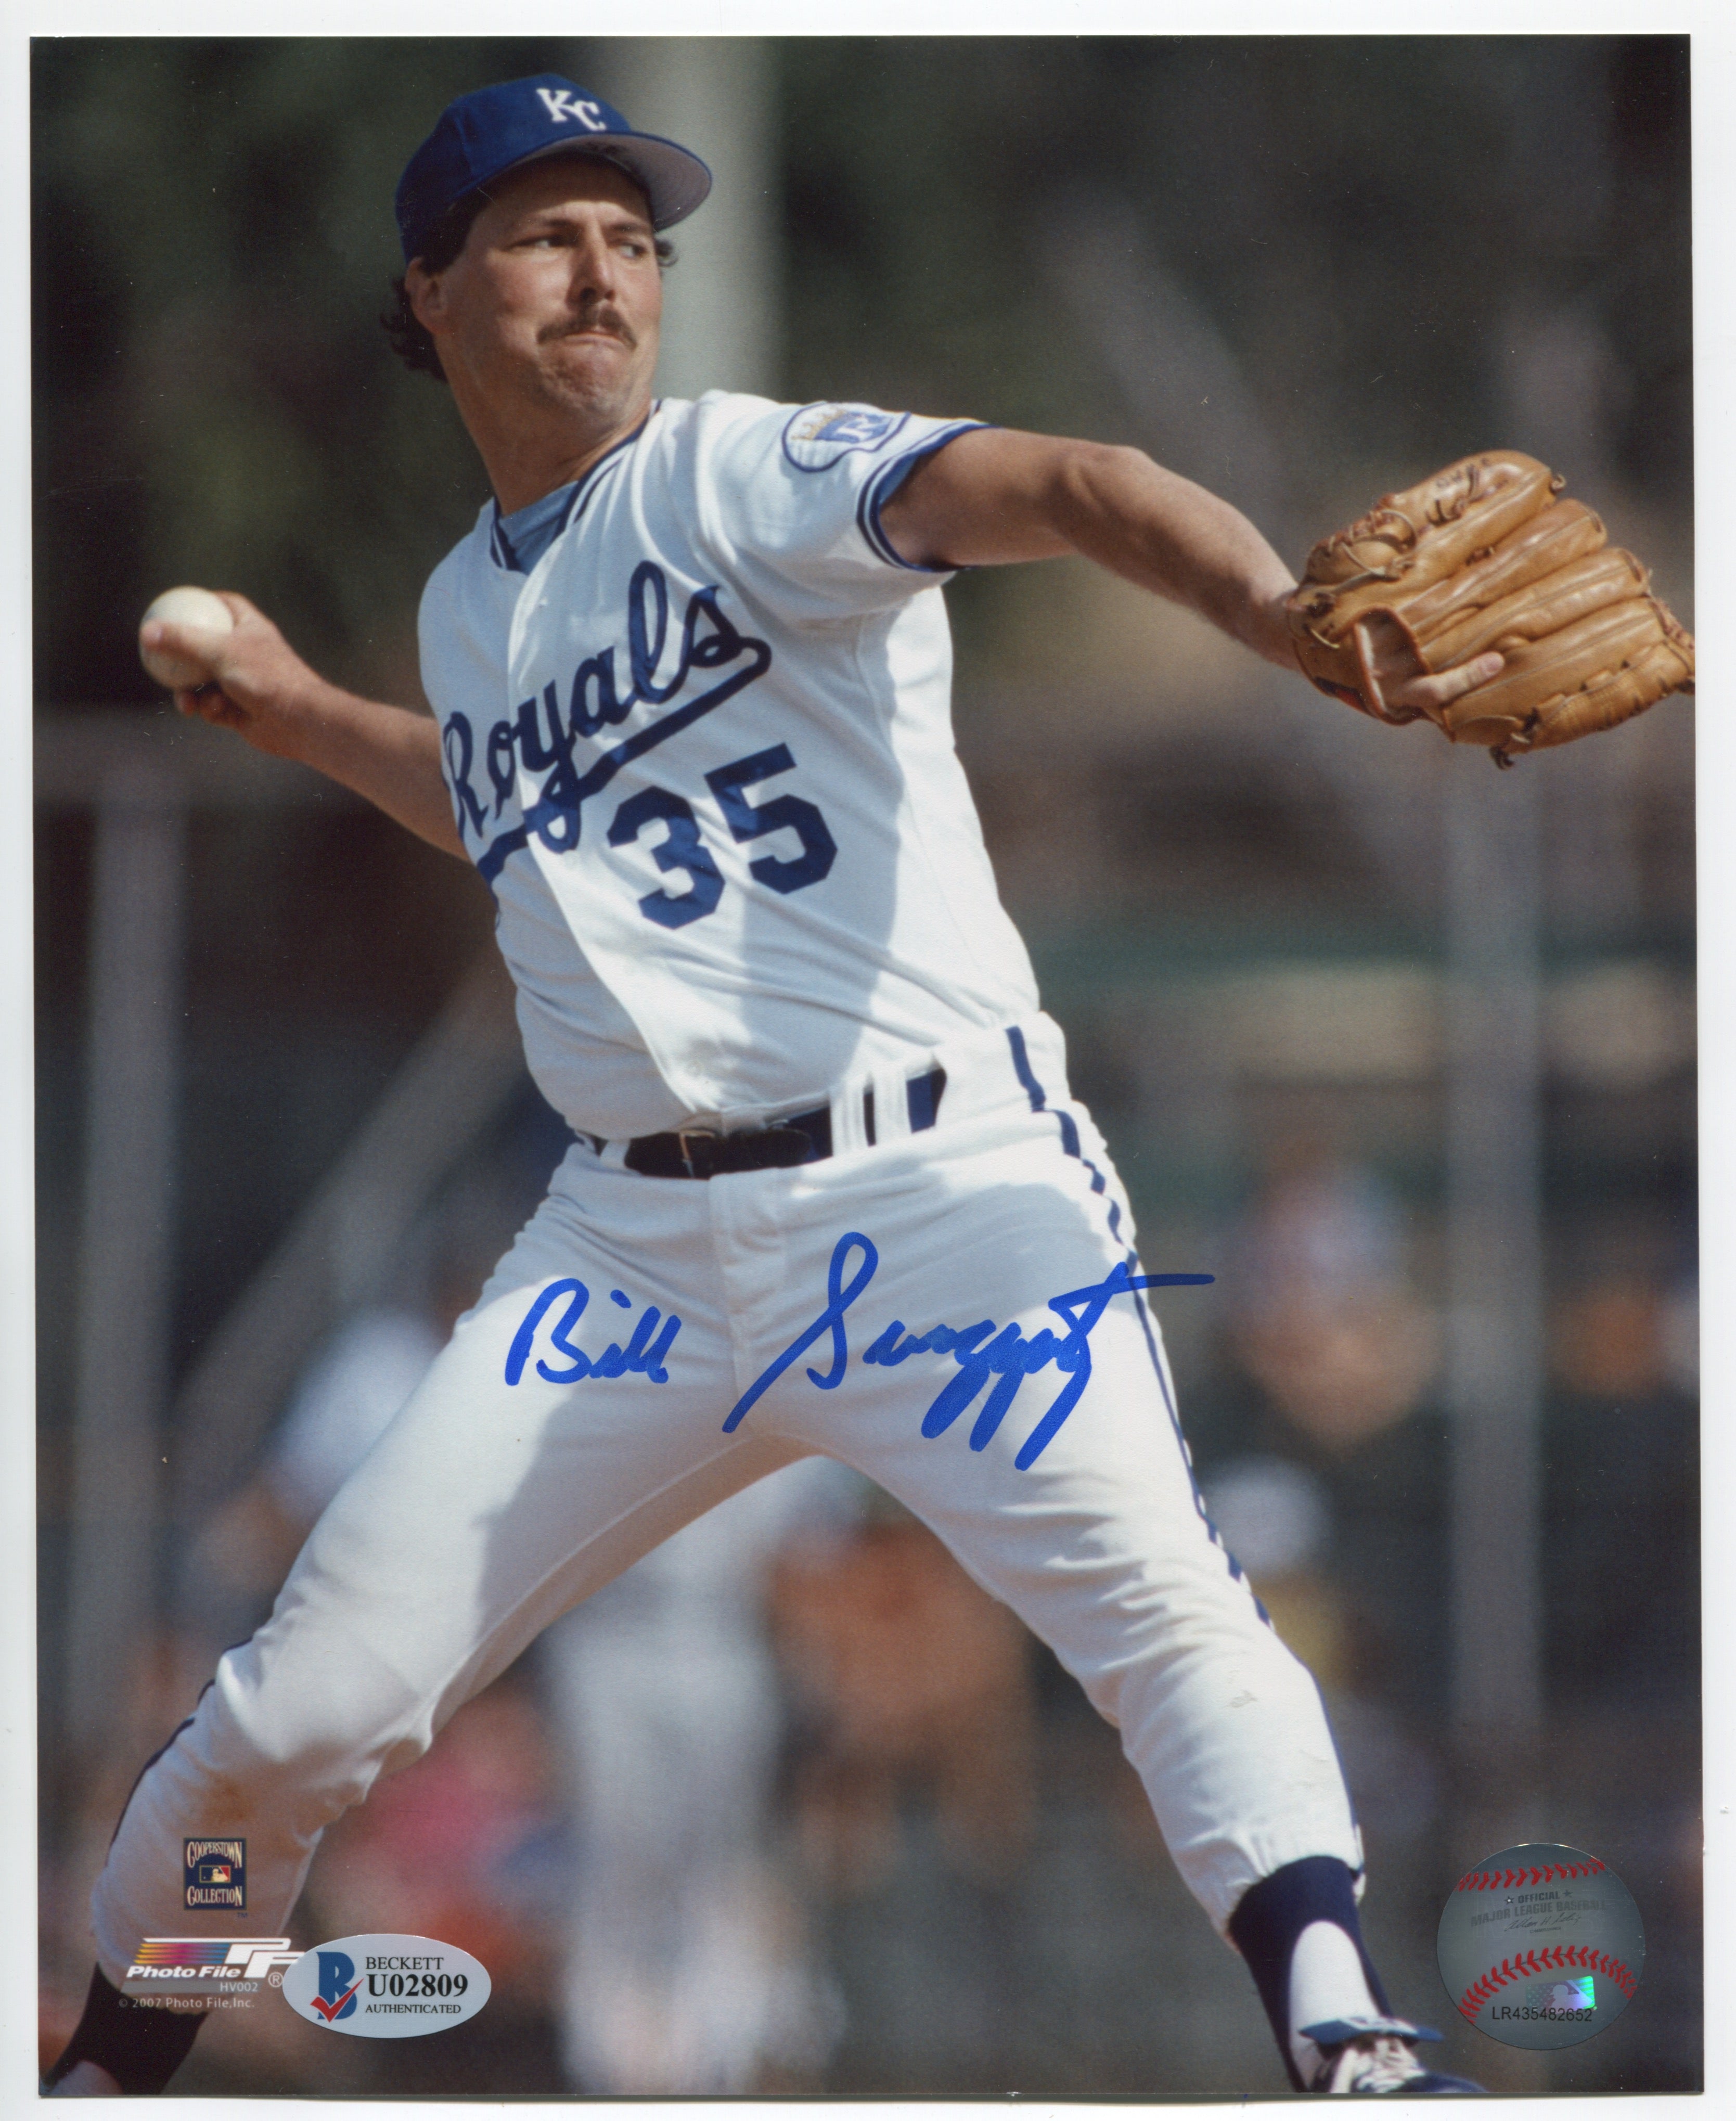 Bill Swaggerty Signed 8x10 Photo | Eastridge Sports Cards